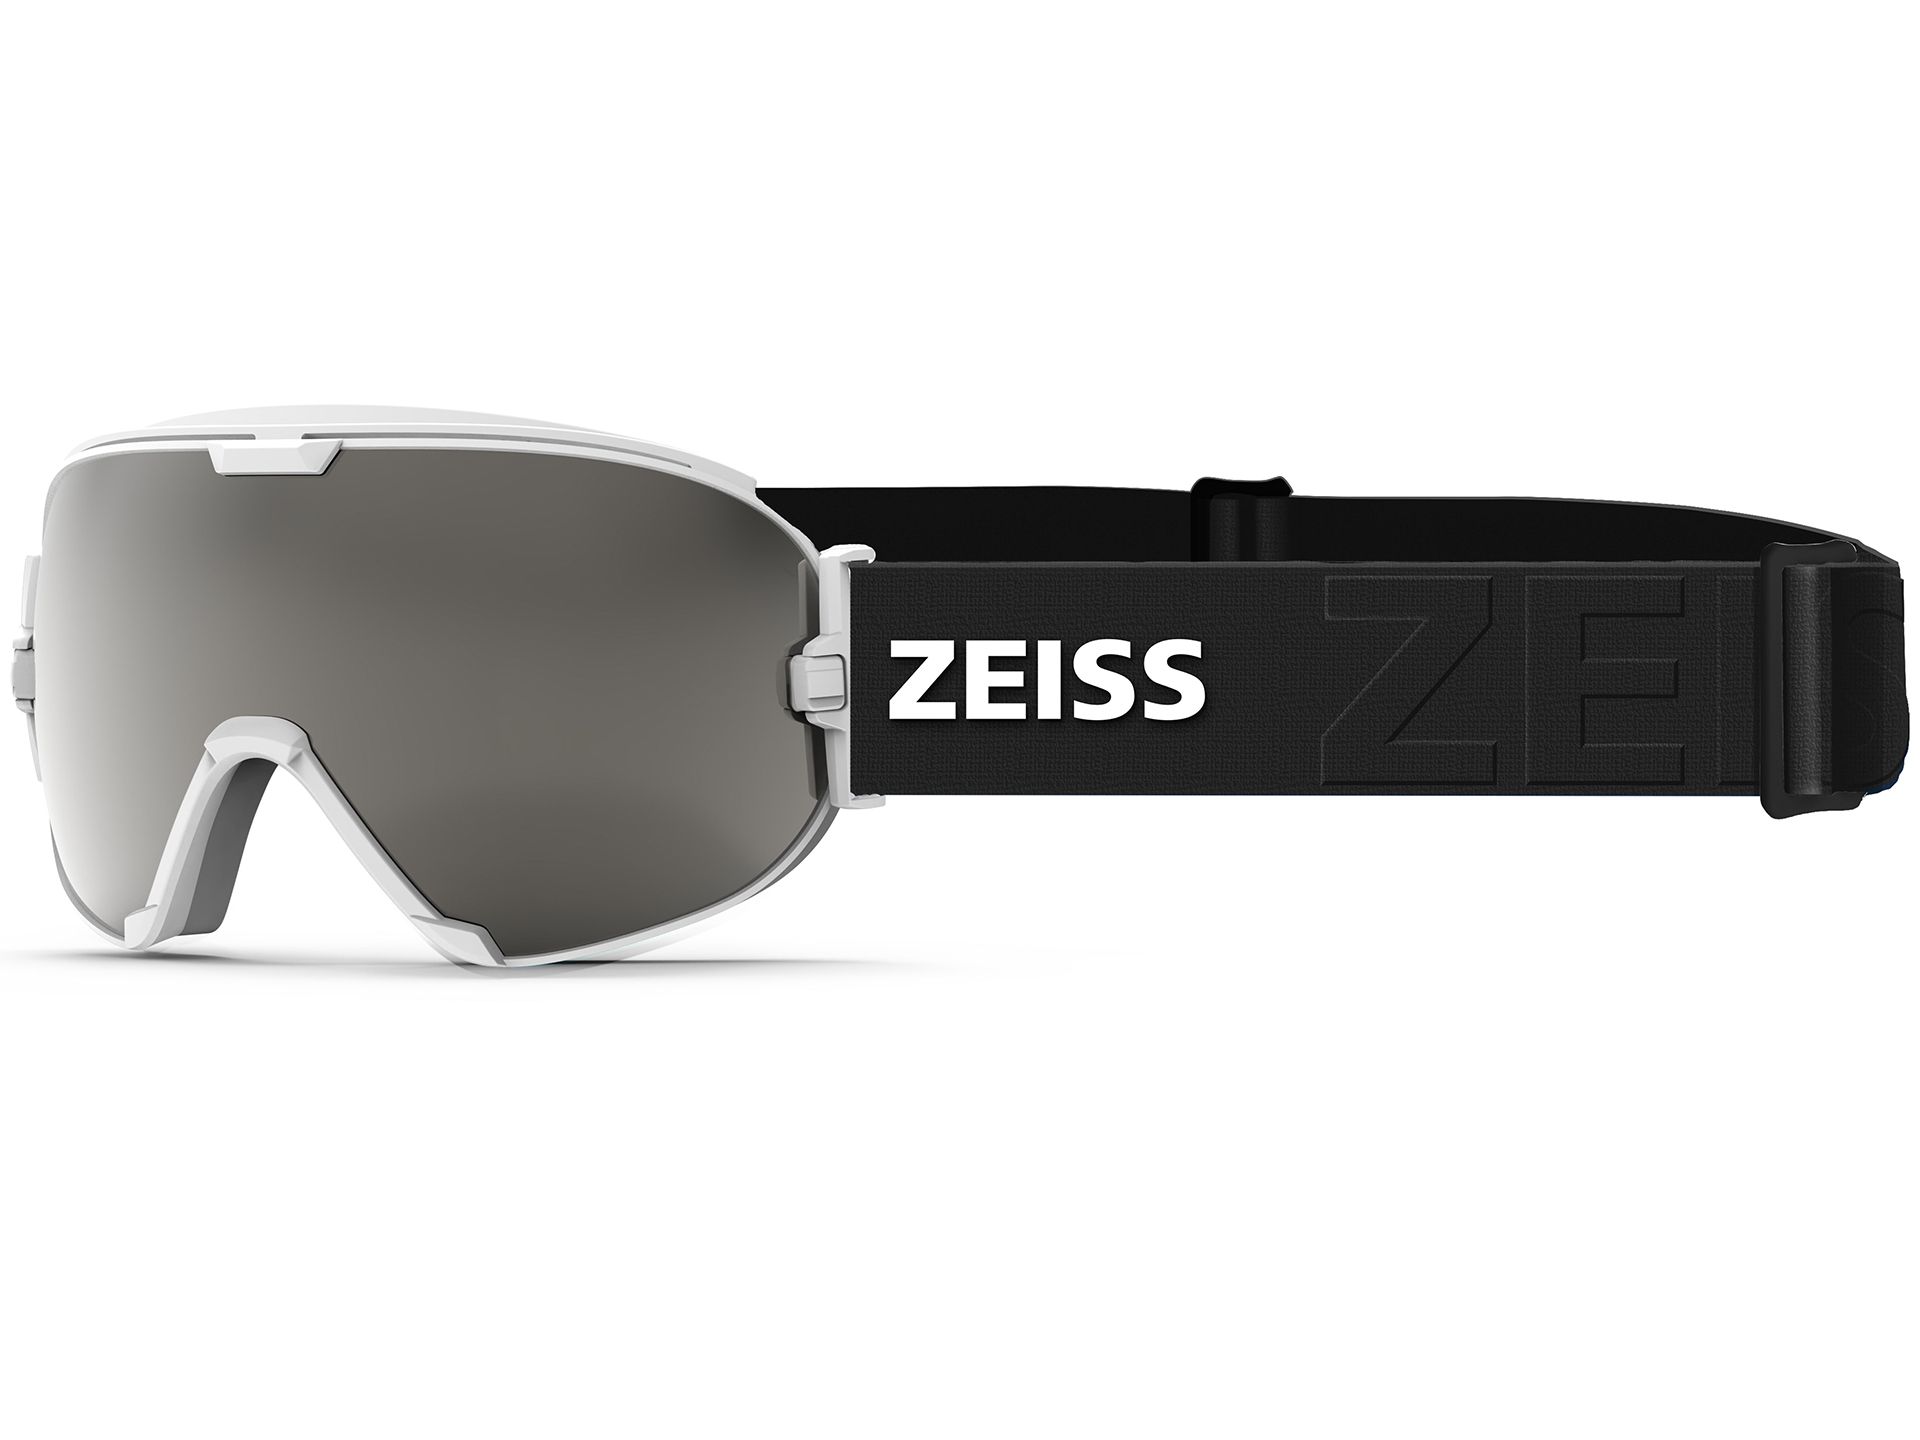 ZEISS snow goggles with dark gray visor and black strap